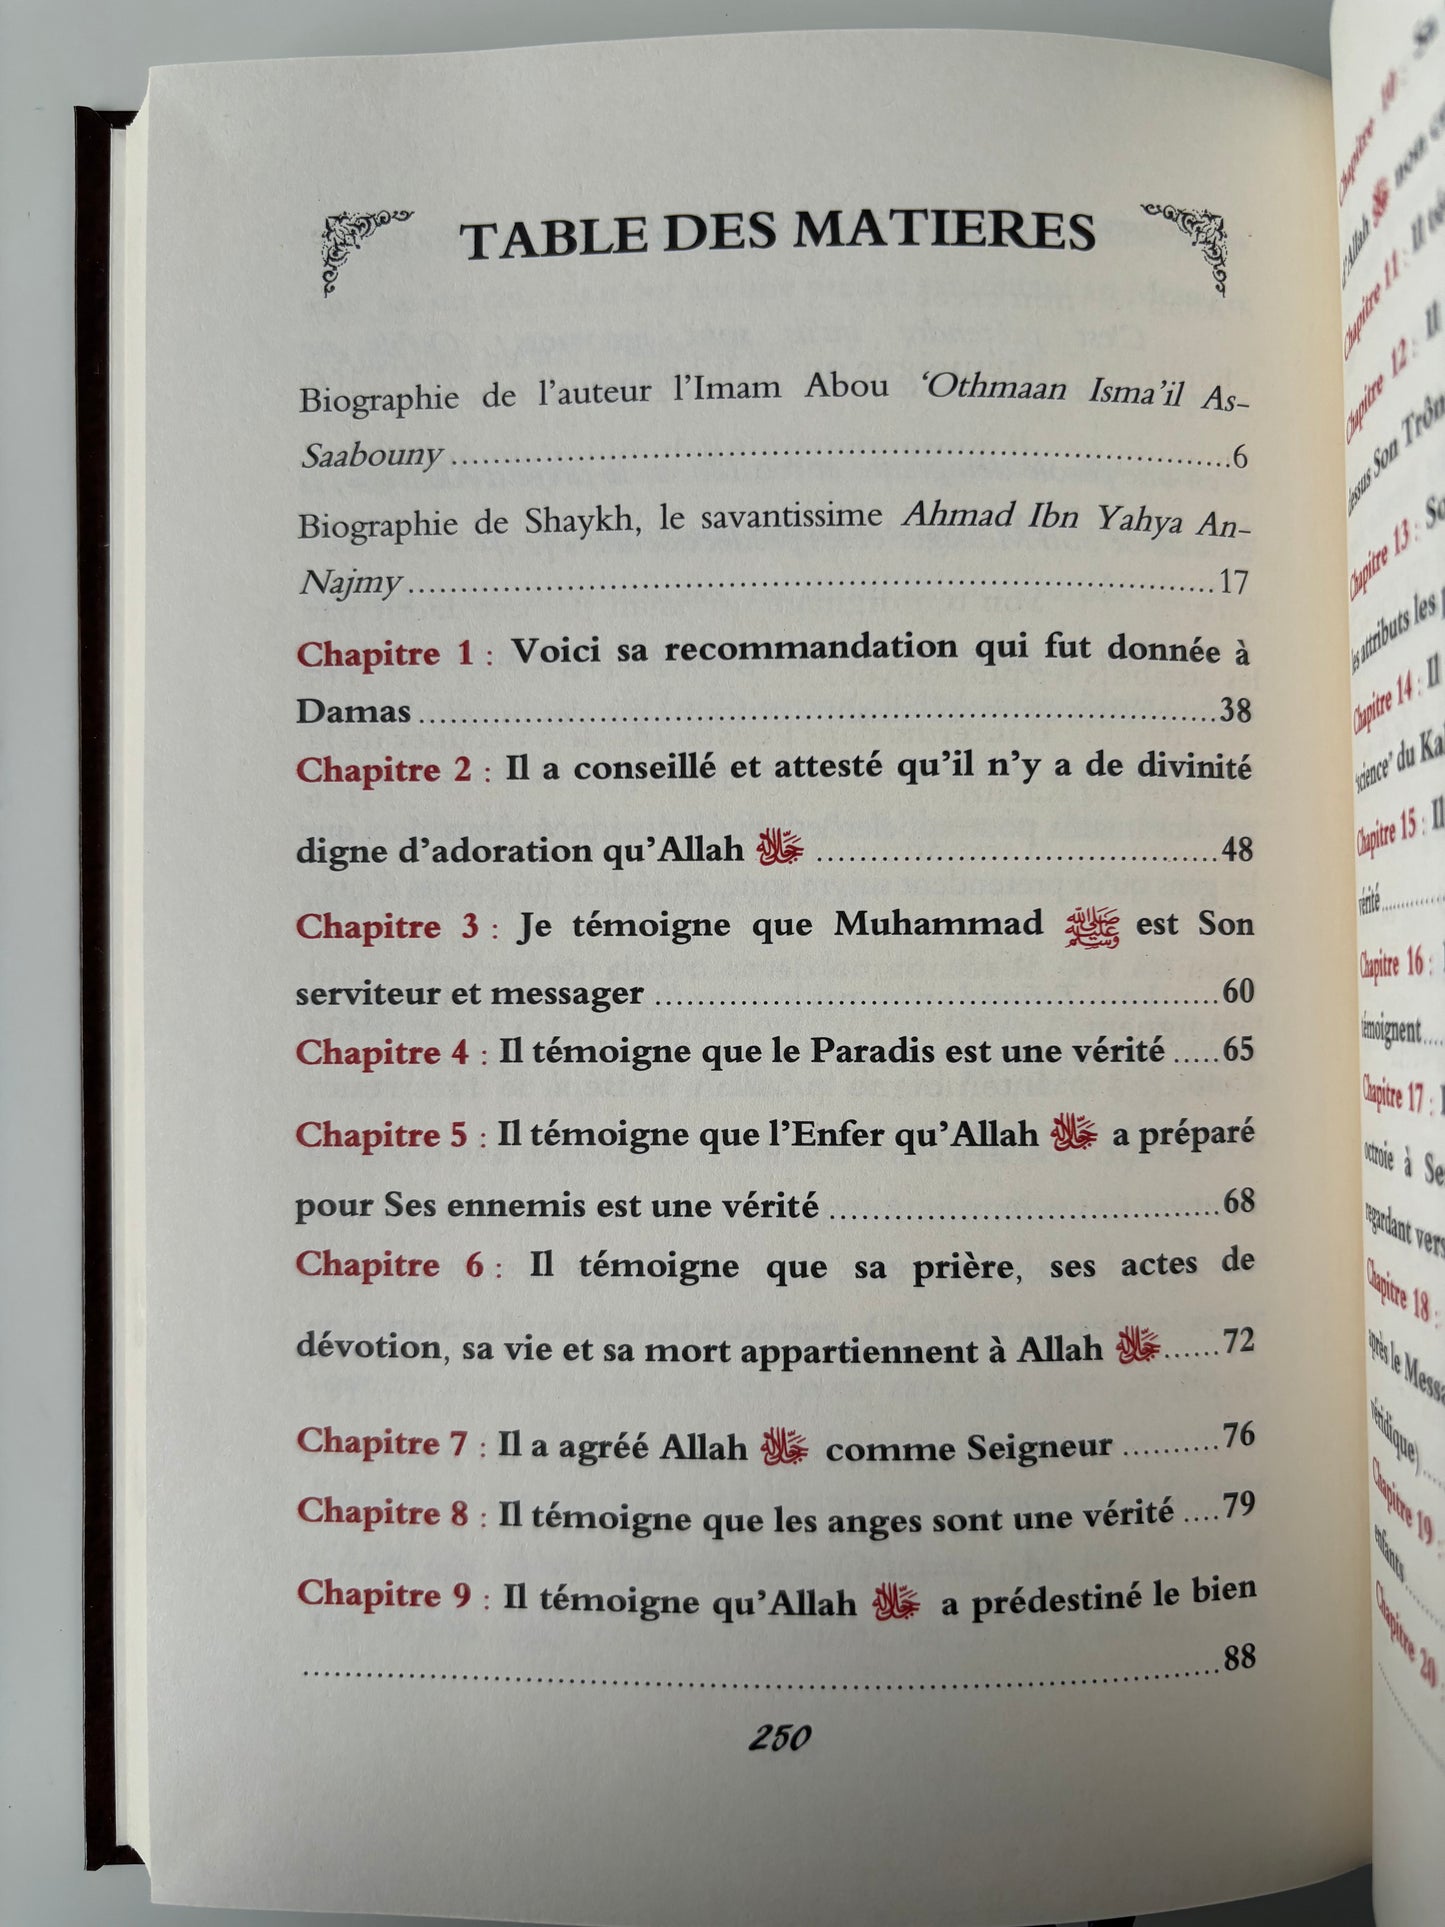 Les Recommandations de l’Imam Abou ‘Othmaan Isma’il As-Saabouny